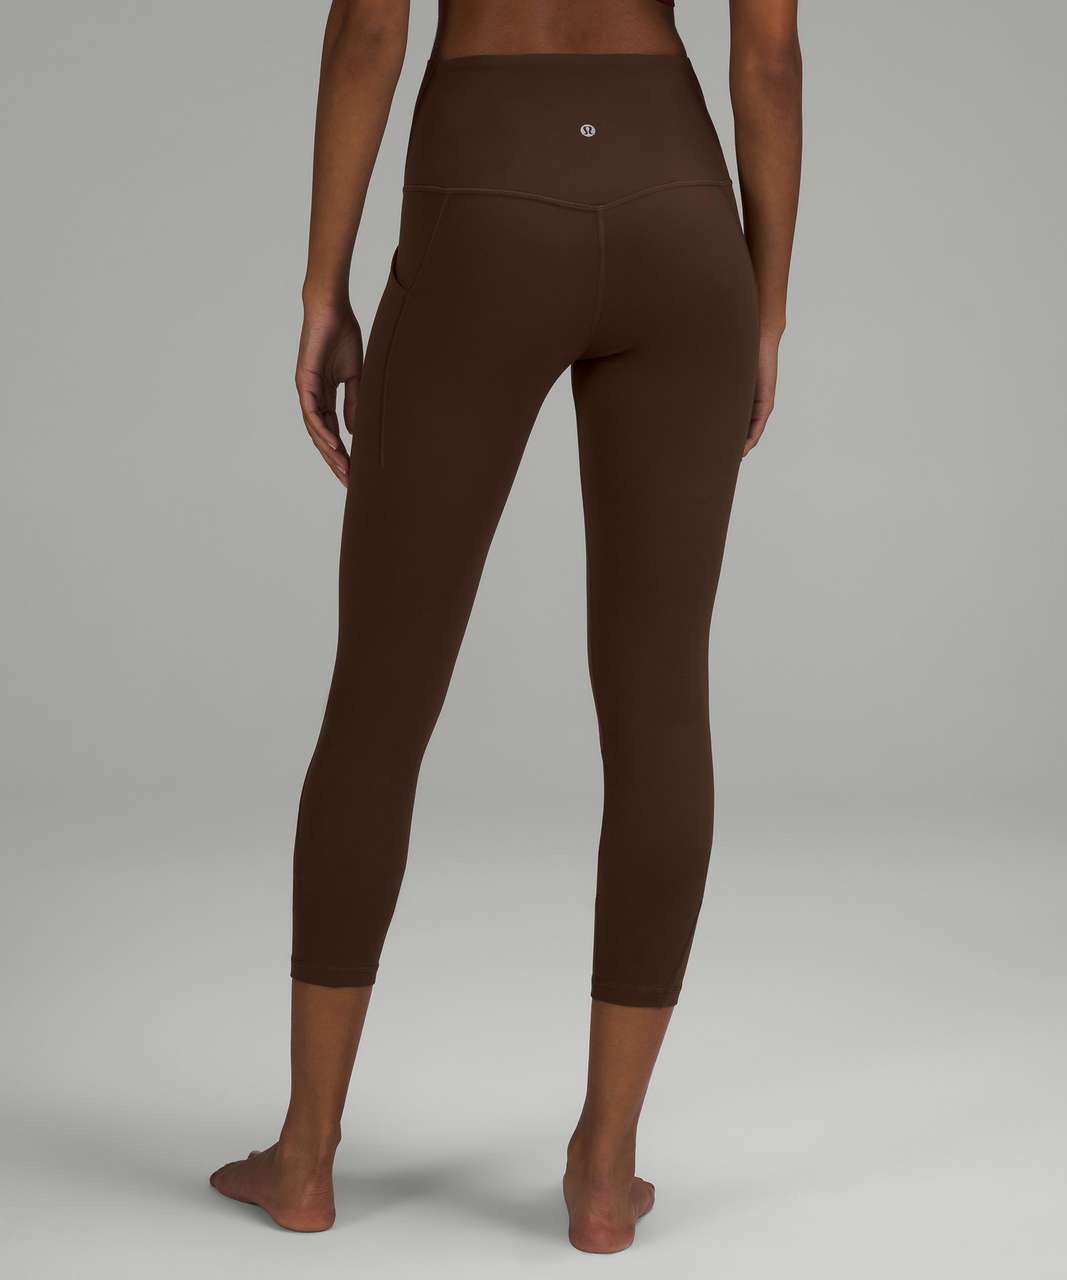 Lululemon Align High-Rise Pant with Pockets 25" - Java (First Release)